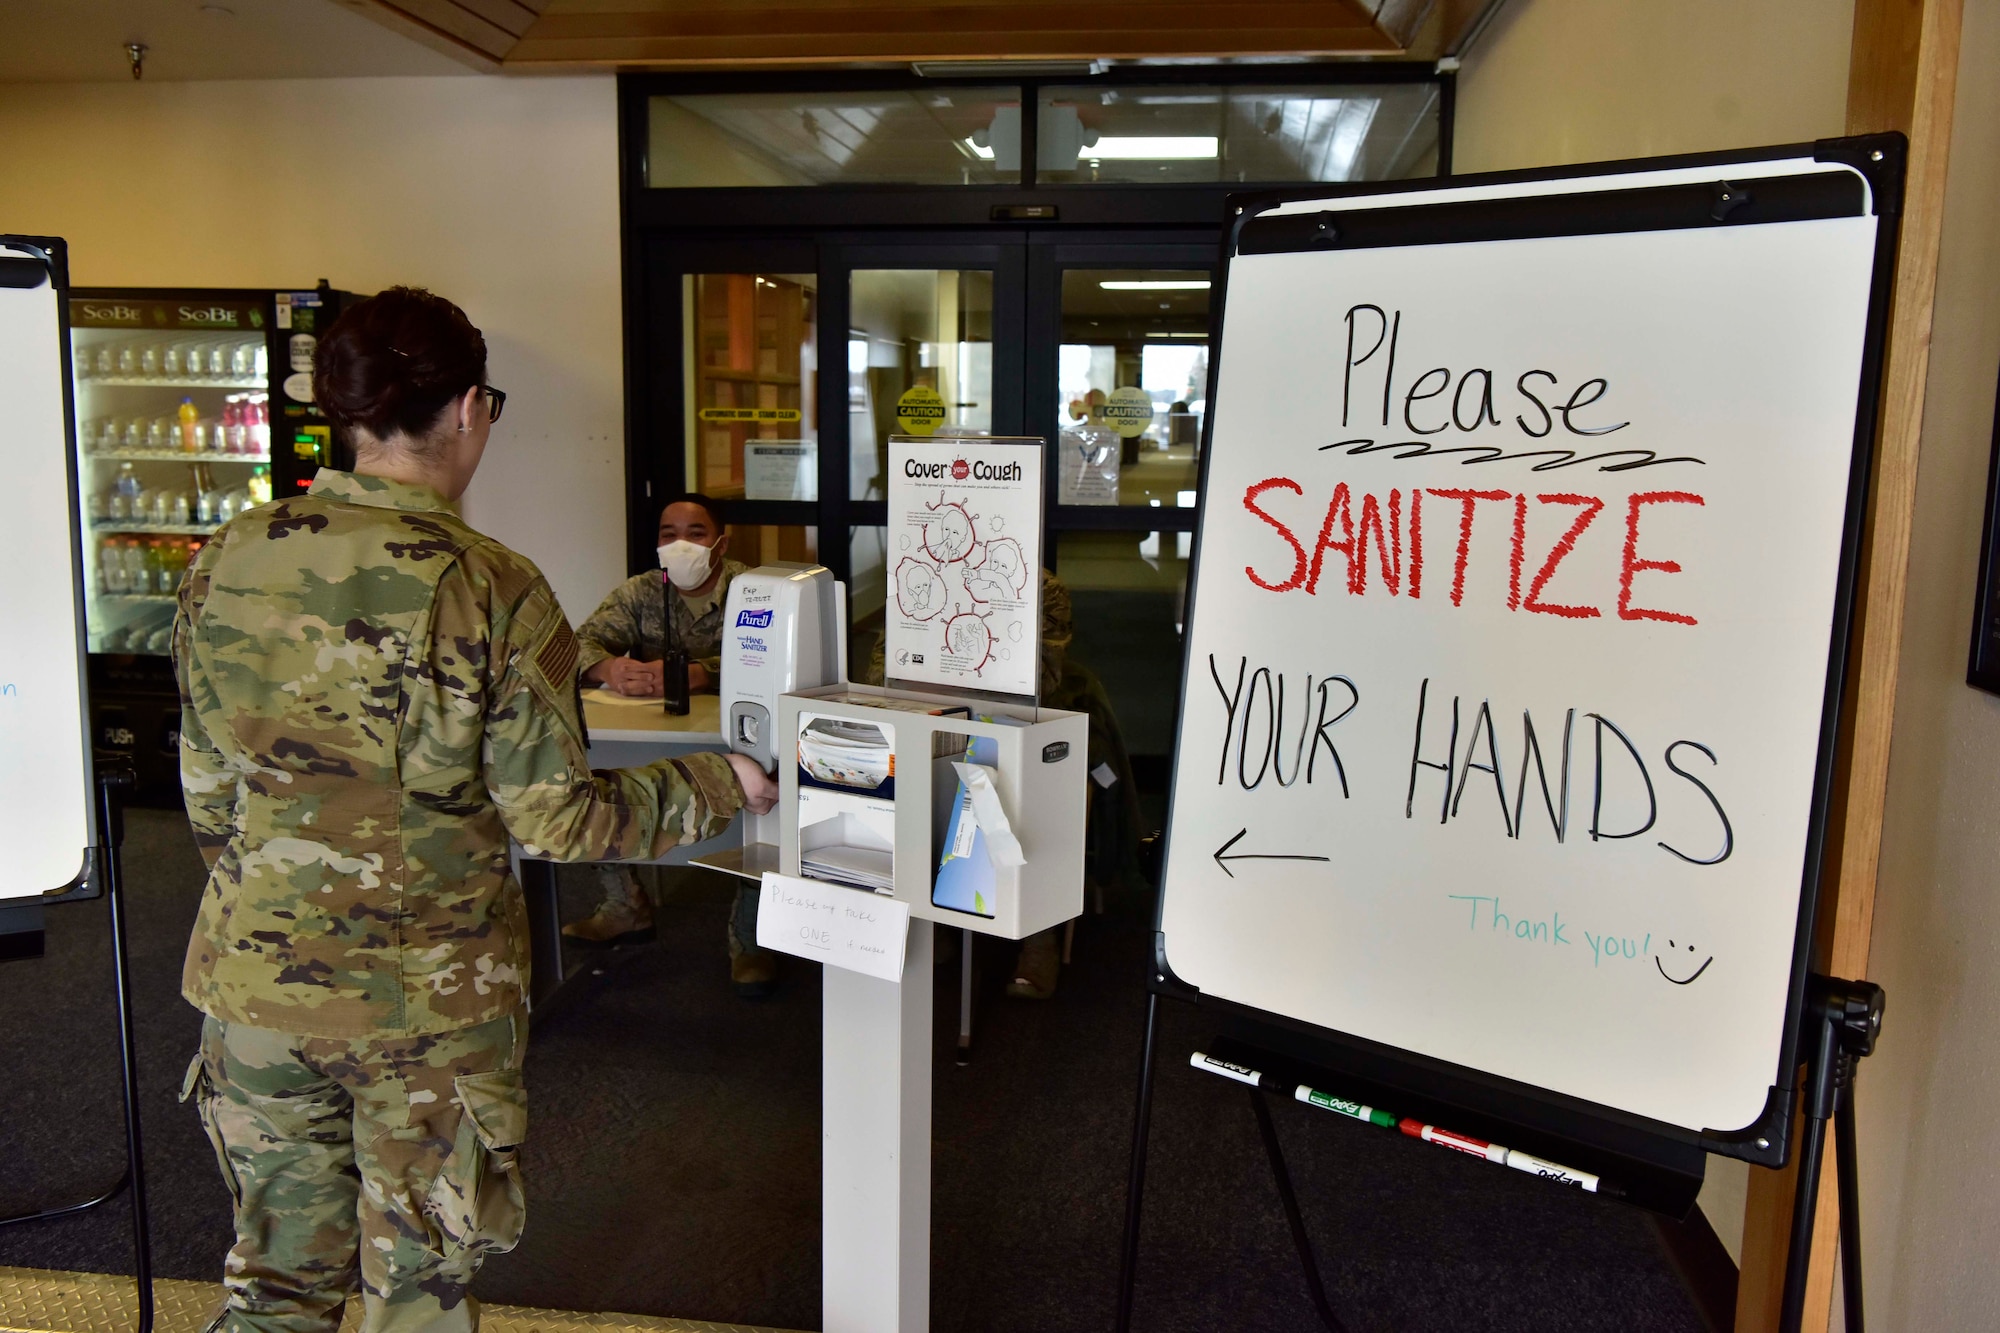 A 354th Medical Group Airman sanitizes her hands before entering the clinic on Eielson Air Force Base, Alaska, March 20, 2020. The 354th MDG has taken extra precautions to help stop the spread of the novel coronavirus including implementing a patient screening checkpoint at the clinic entrance. (U.S. Air Force photo by Senior Airman Beaux Hebert)